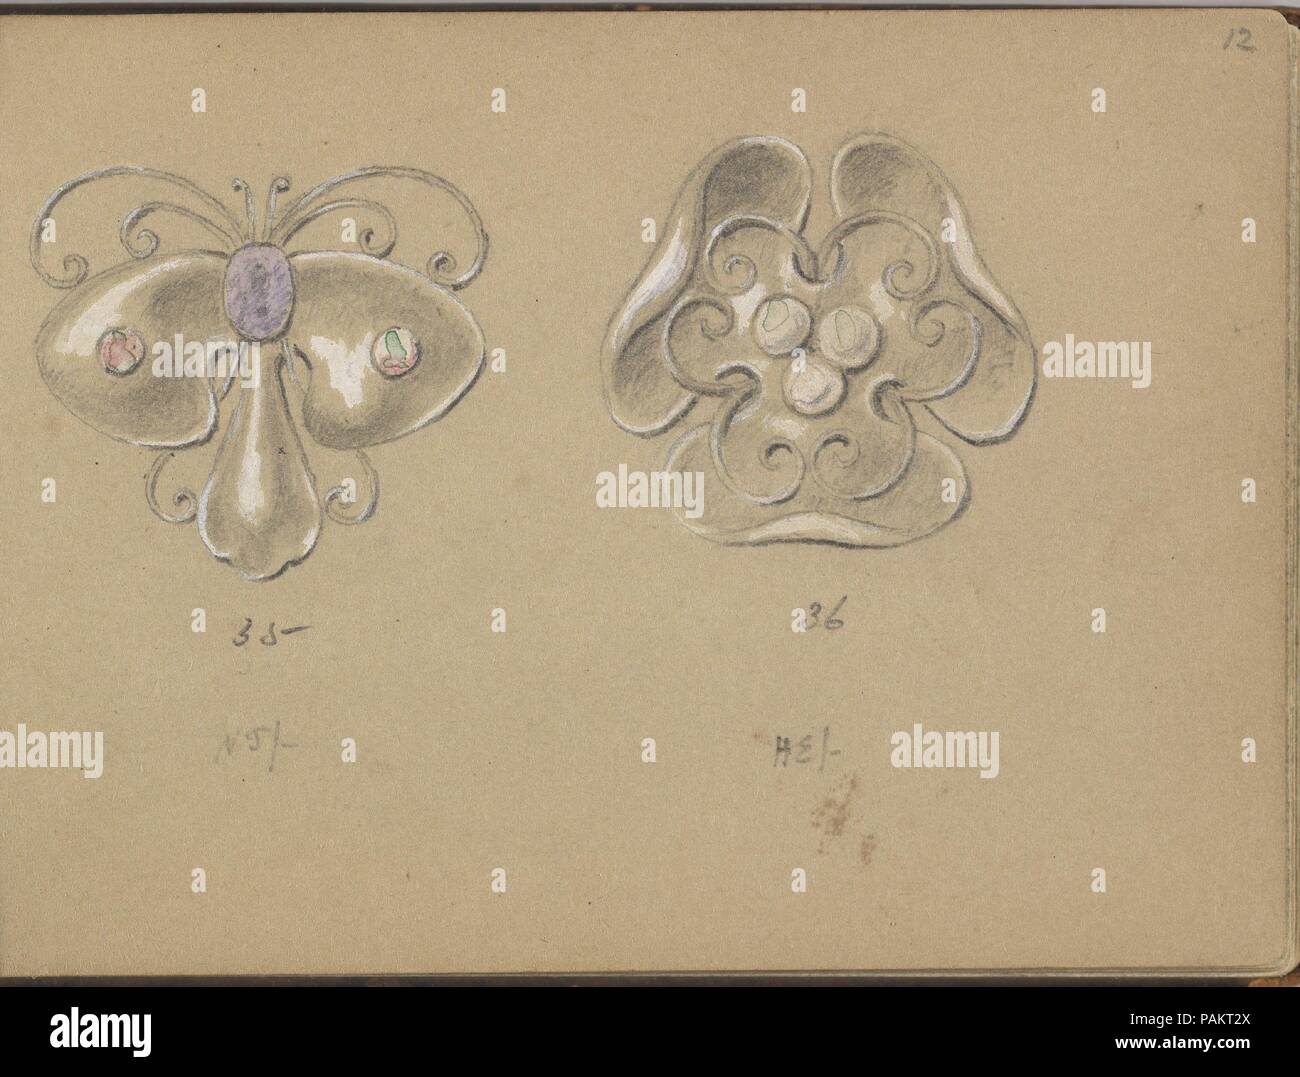 Two SIlver Jewelry Designs. Artist: Edgar Gilstrap Simpson (British, 1867-1945 (presumed)). Dimensions: sheet: 3 1/2 x 5 in. (8.9 x 12.7 cm). Date: 1899.  Two designs for silver pieces of jewelry, possibly brooches or pins. The first is shaped like a butterfly with a purple colored stone for the head and one smaller pink stone on each wing. The second looks like a flower with three white petals and three white pearls in the center. The designs are numbered individually (continuous from the previous pages). Museum: Metropolitan Museum of Art, New York, USA. Stock Photo